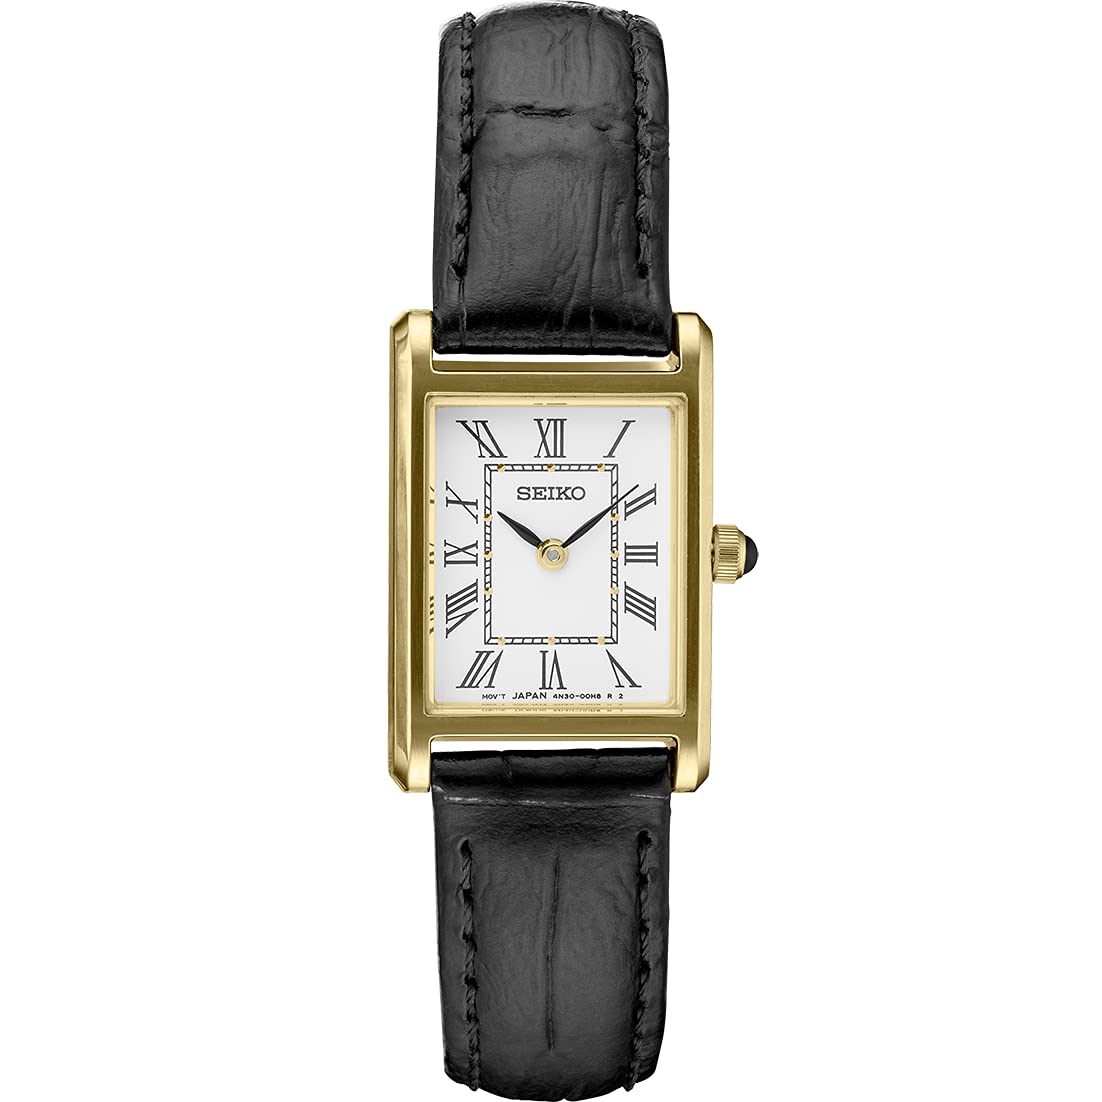 SEIKO SWR054 Watch for Women - Essentials Collection - Water Resistant with Gold-Tone Stainless Steel Rectangular Case, White Dial with Roman Numerals, and Black Leather Strap